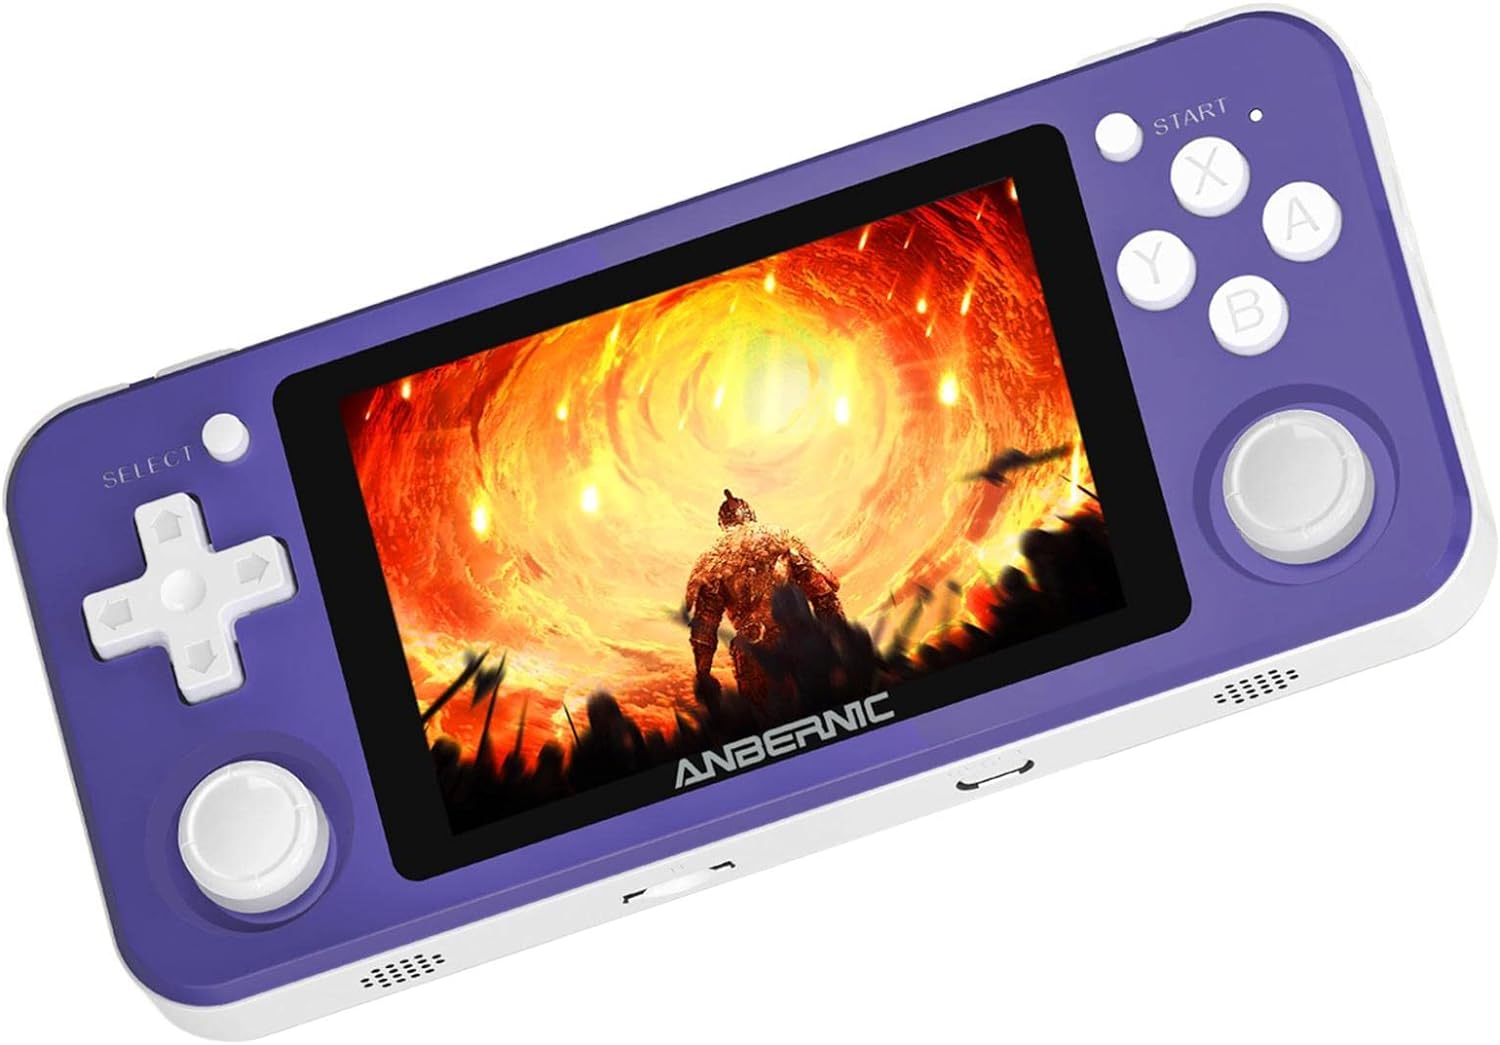 N/A/A Handheld Game Console Review